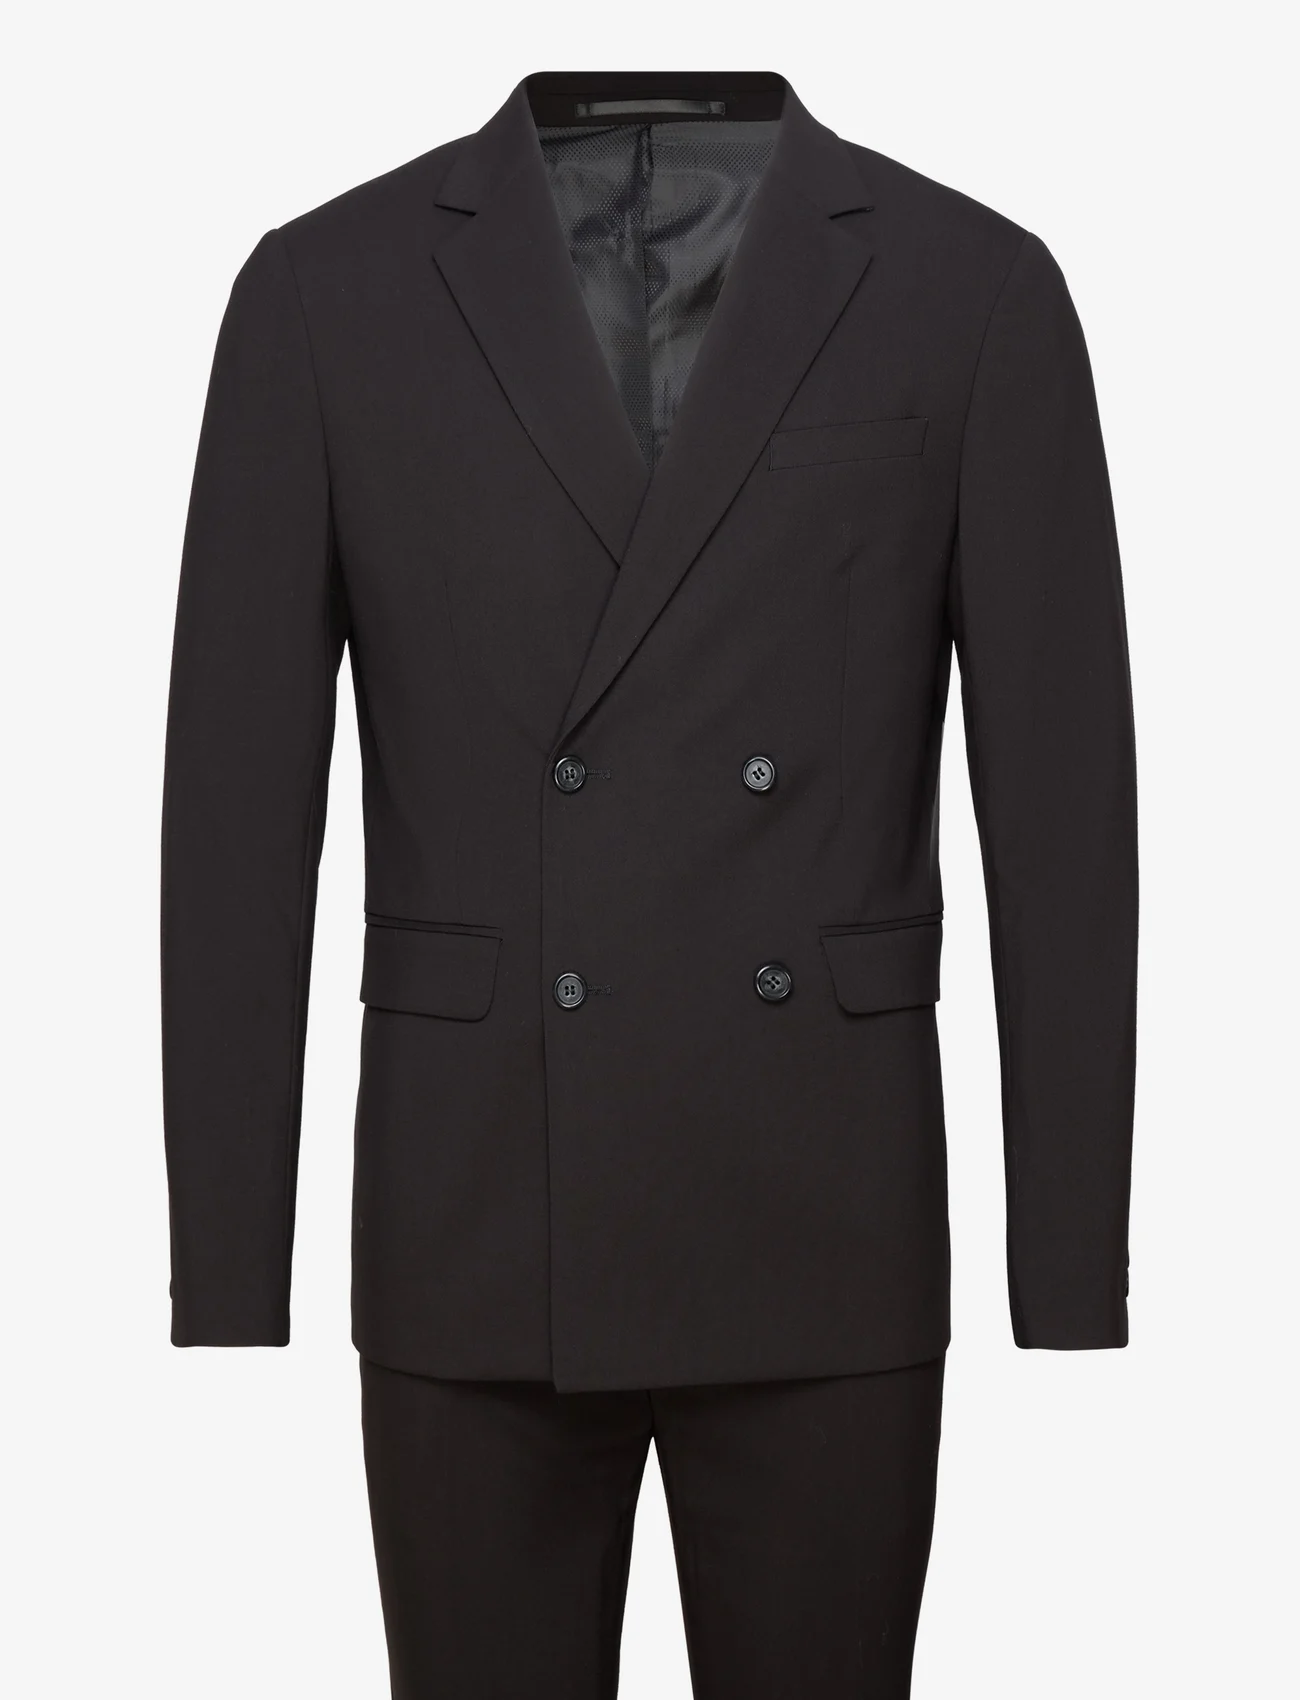 Lindbergh - Plain DB mens suit - normal lenght - double breasted suits - black - 0